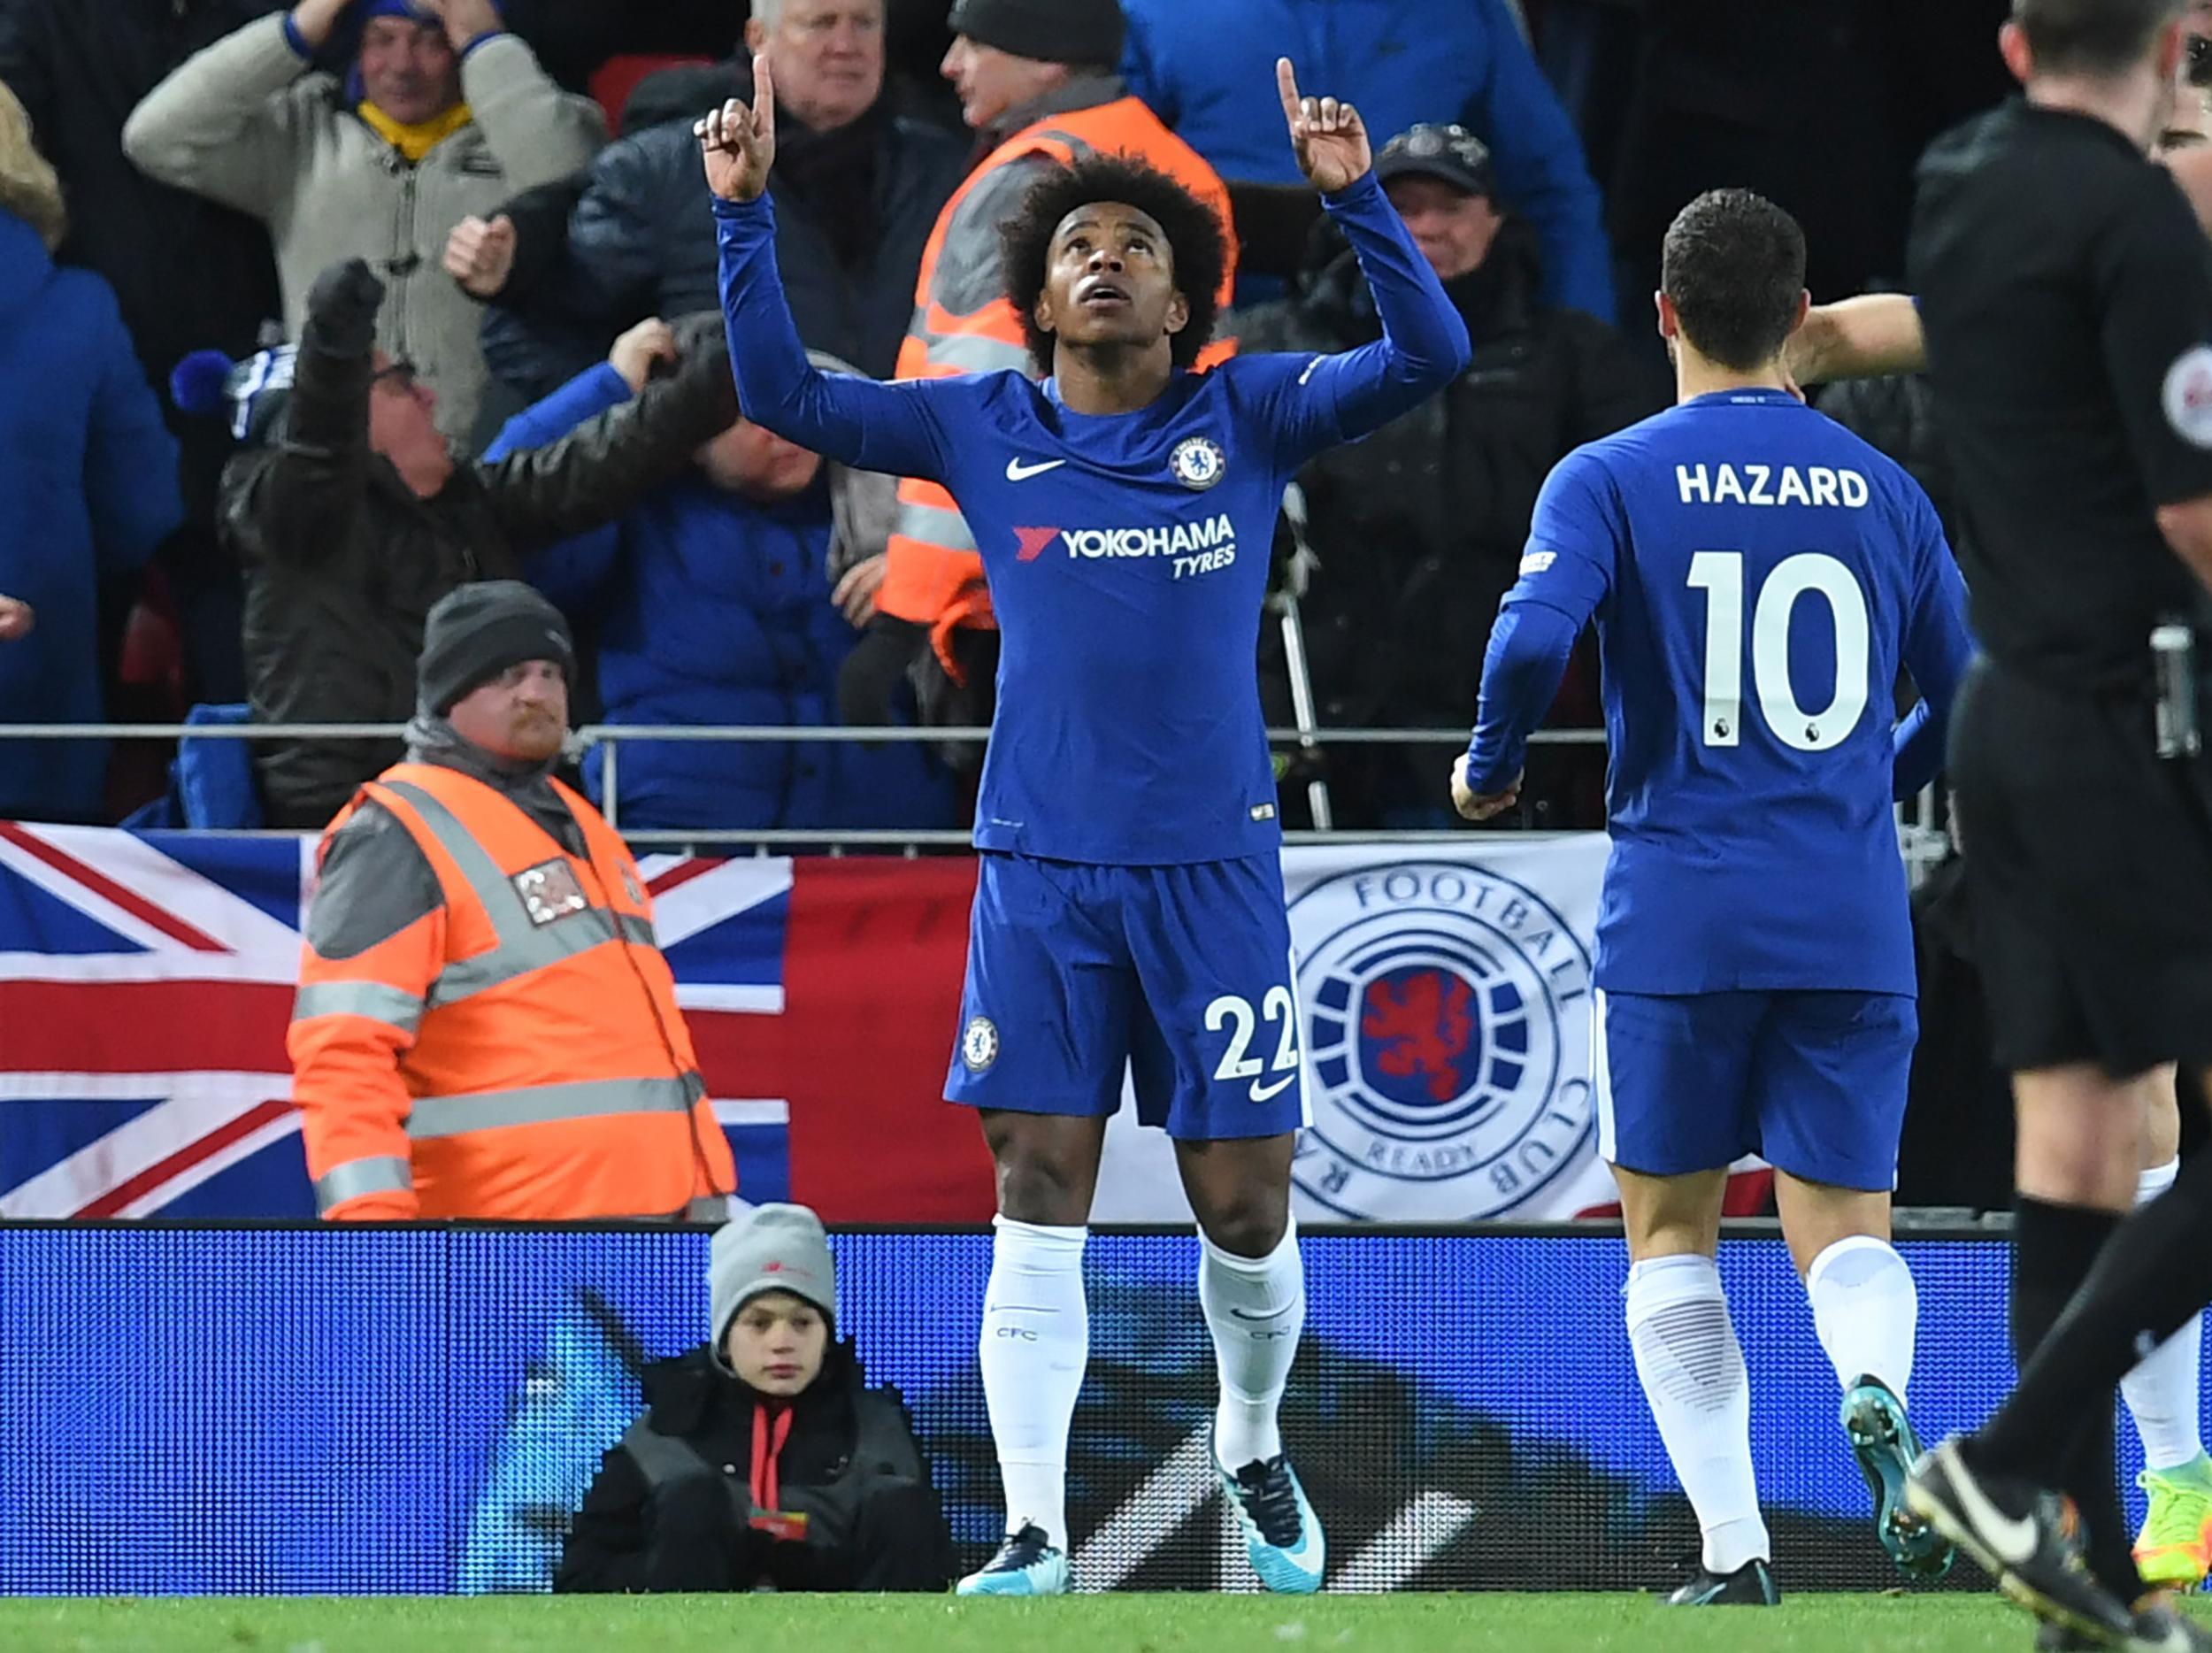 Willian made an immediate impact from the bench and ensured the points were shared at Anfield